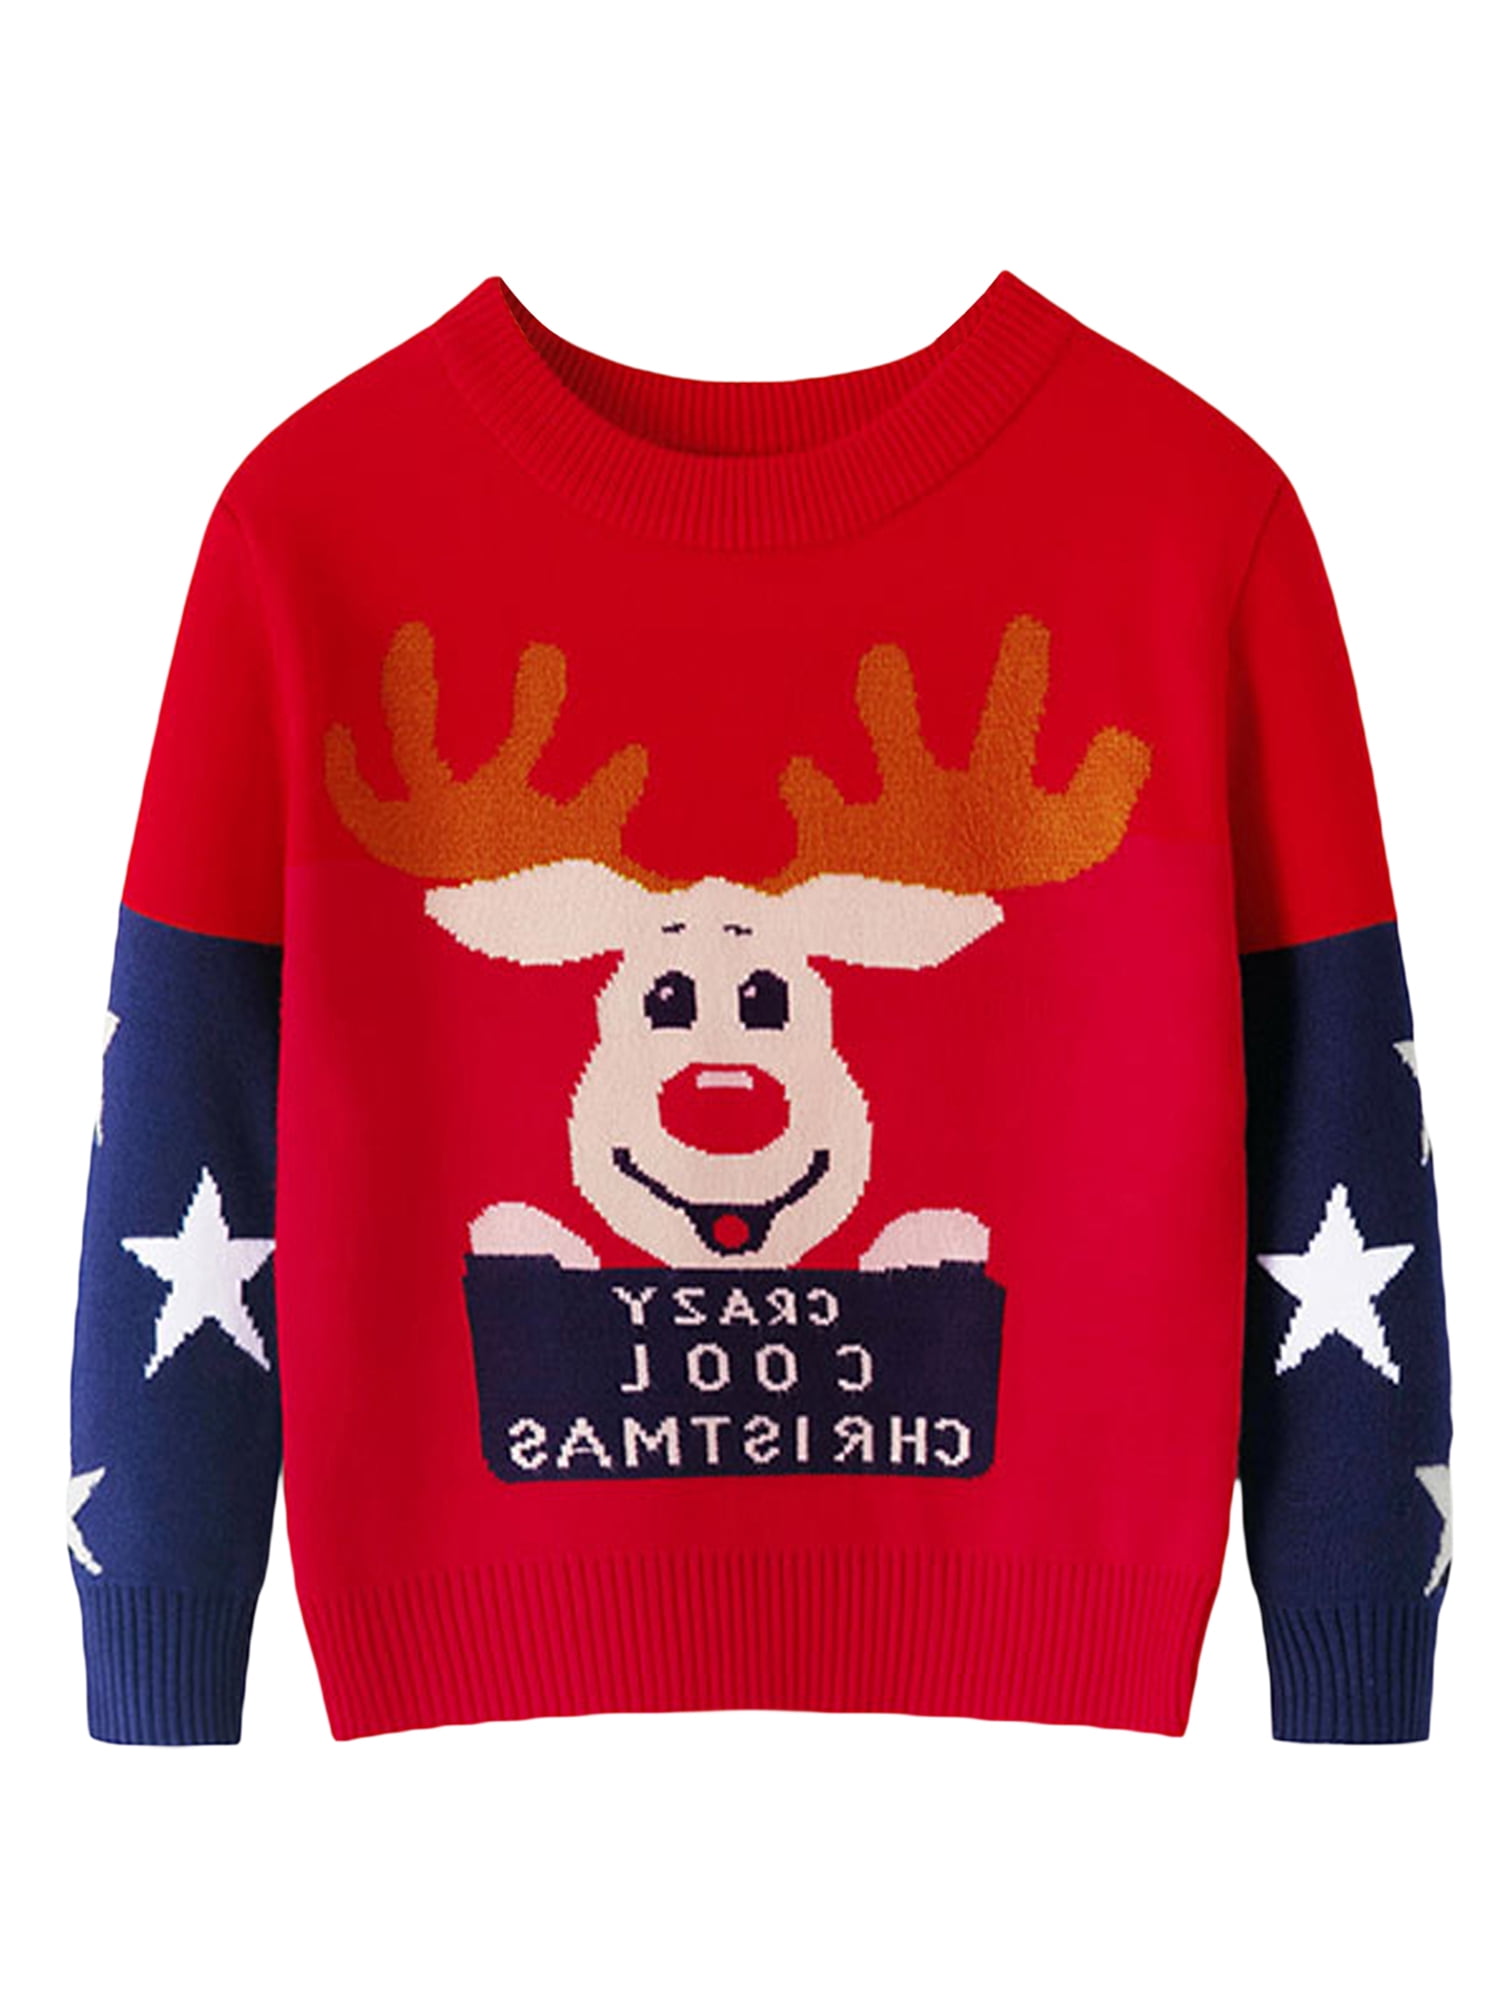 Navy Size1-2 Years see Description Brand New Christmas Jumper Reindeers Red 